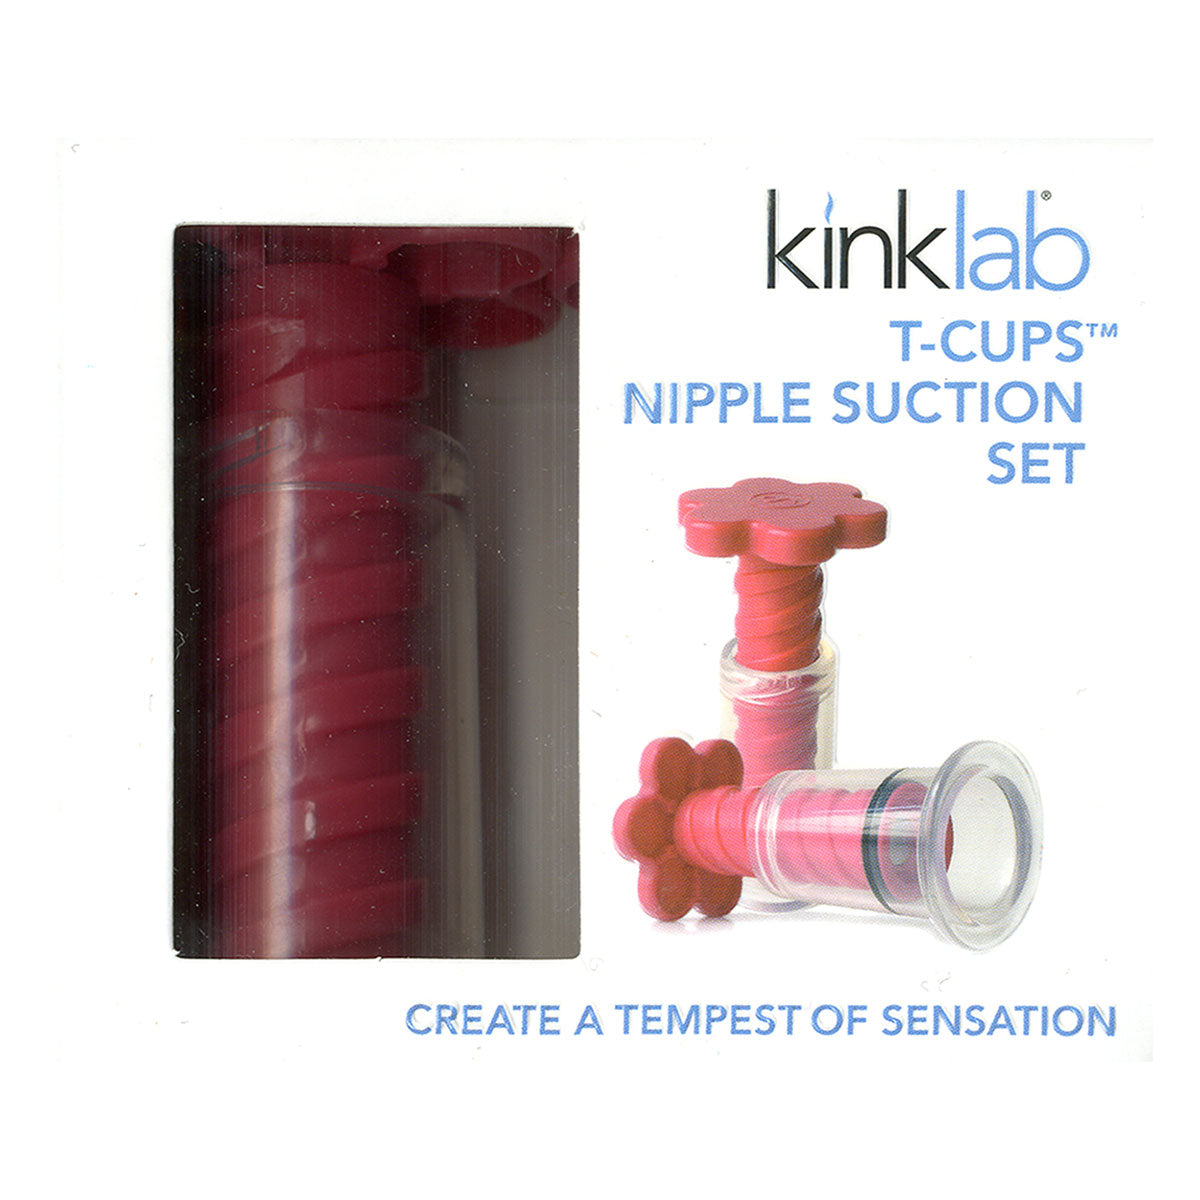 T-Cups Nipple Suction Set Intimates Adult Boutique